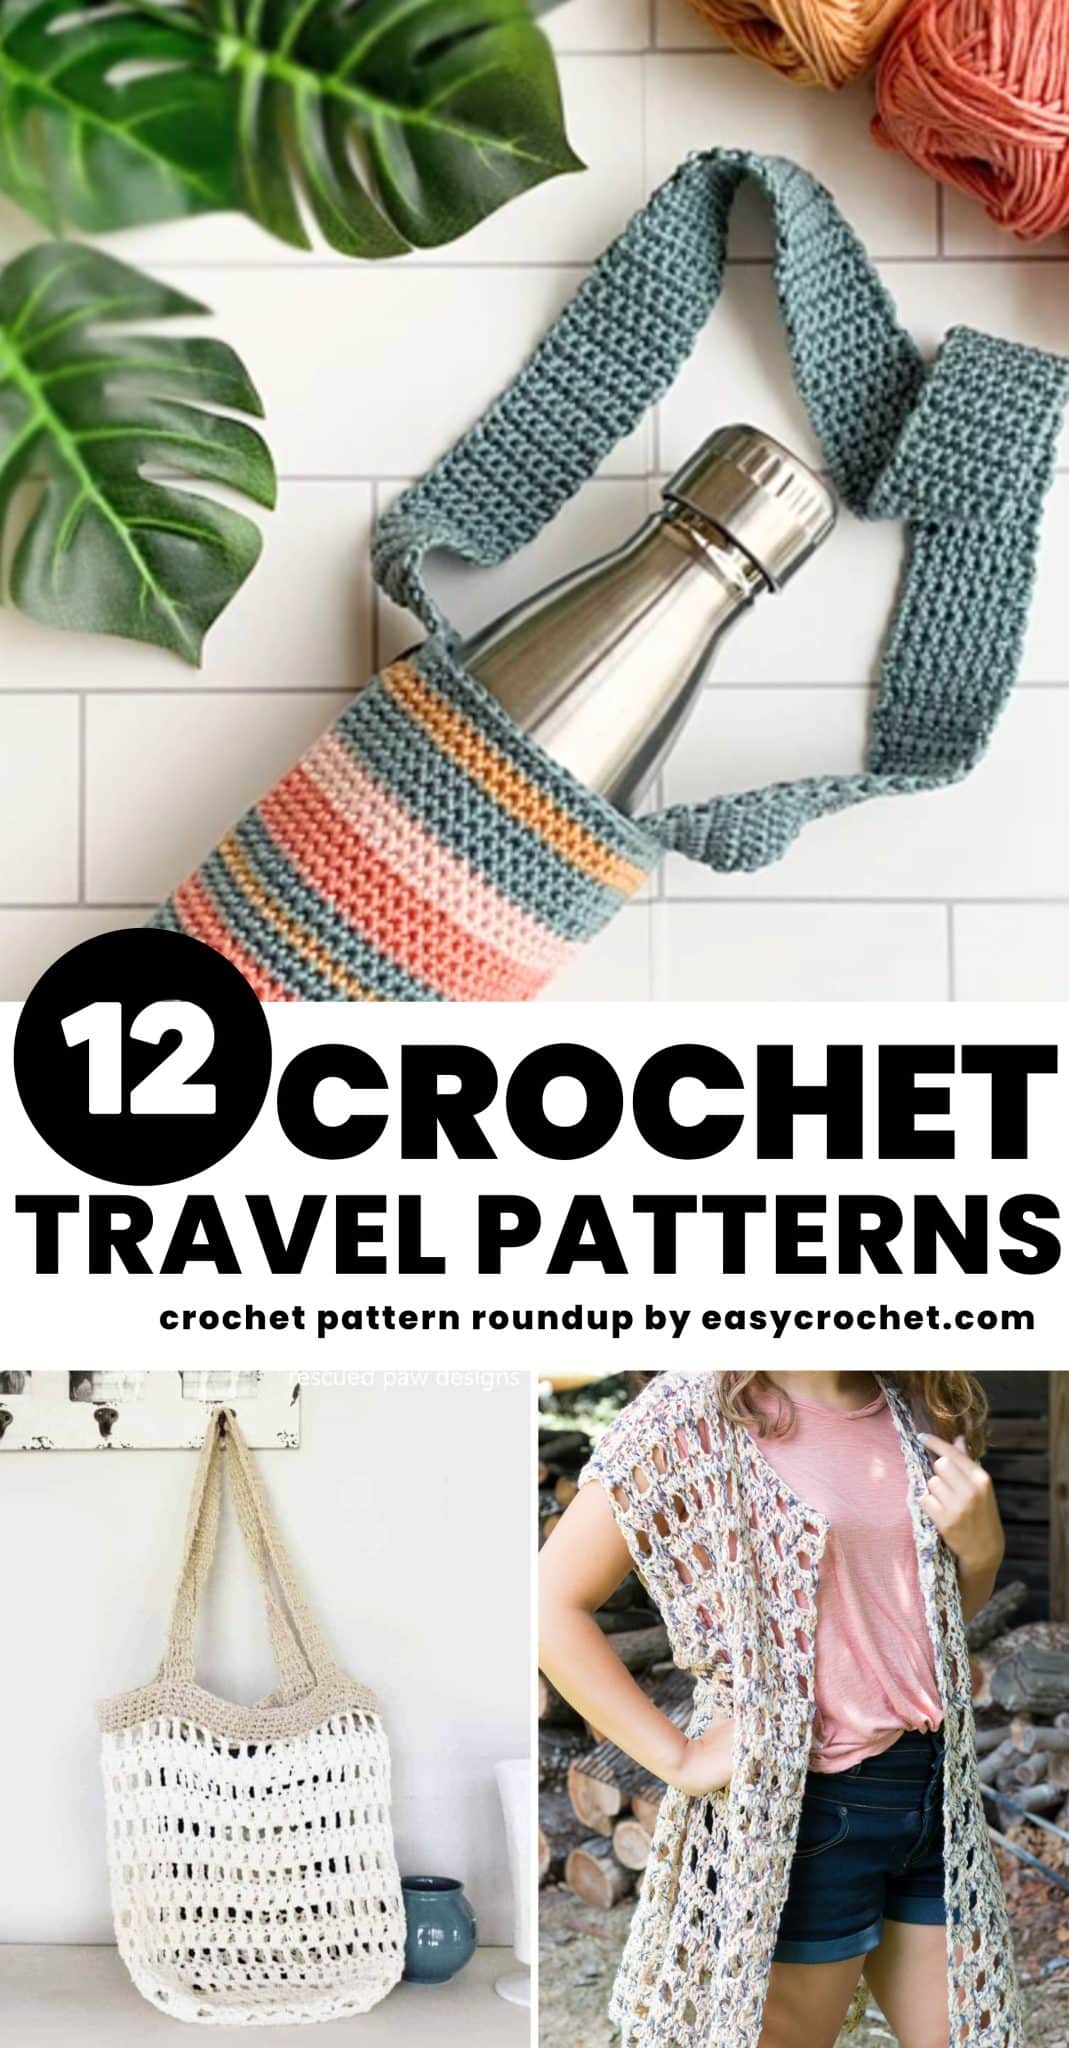 5 Travel Project Bags for Knitting and Crocheting on the Go